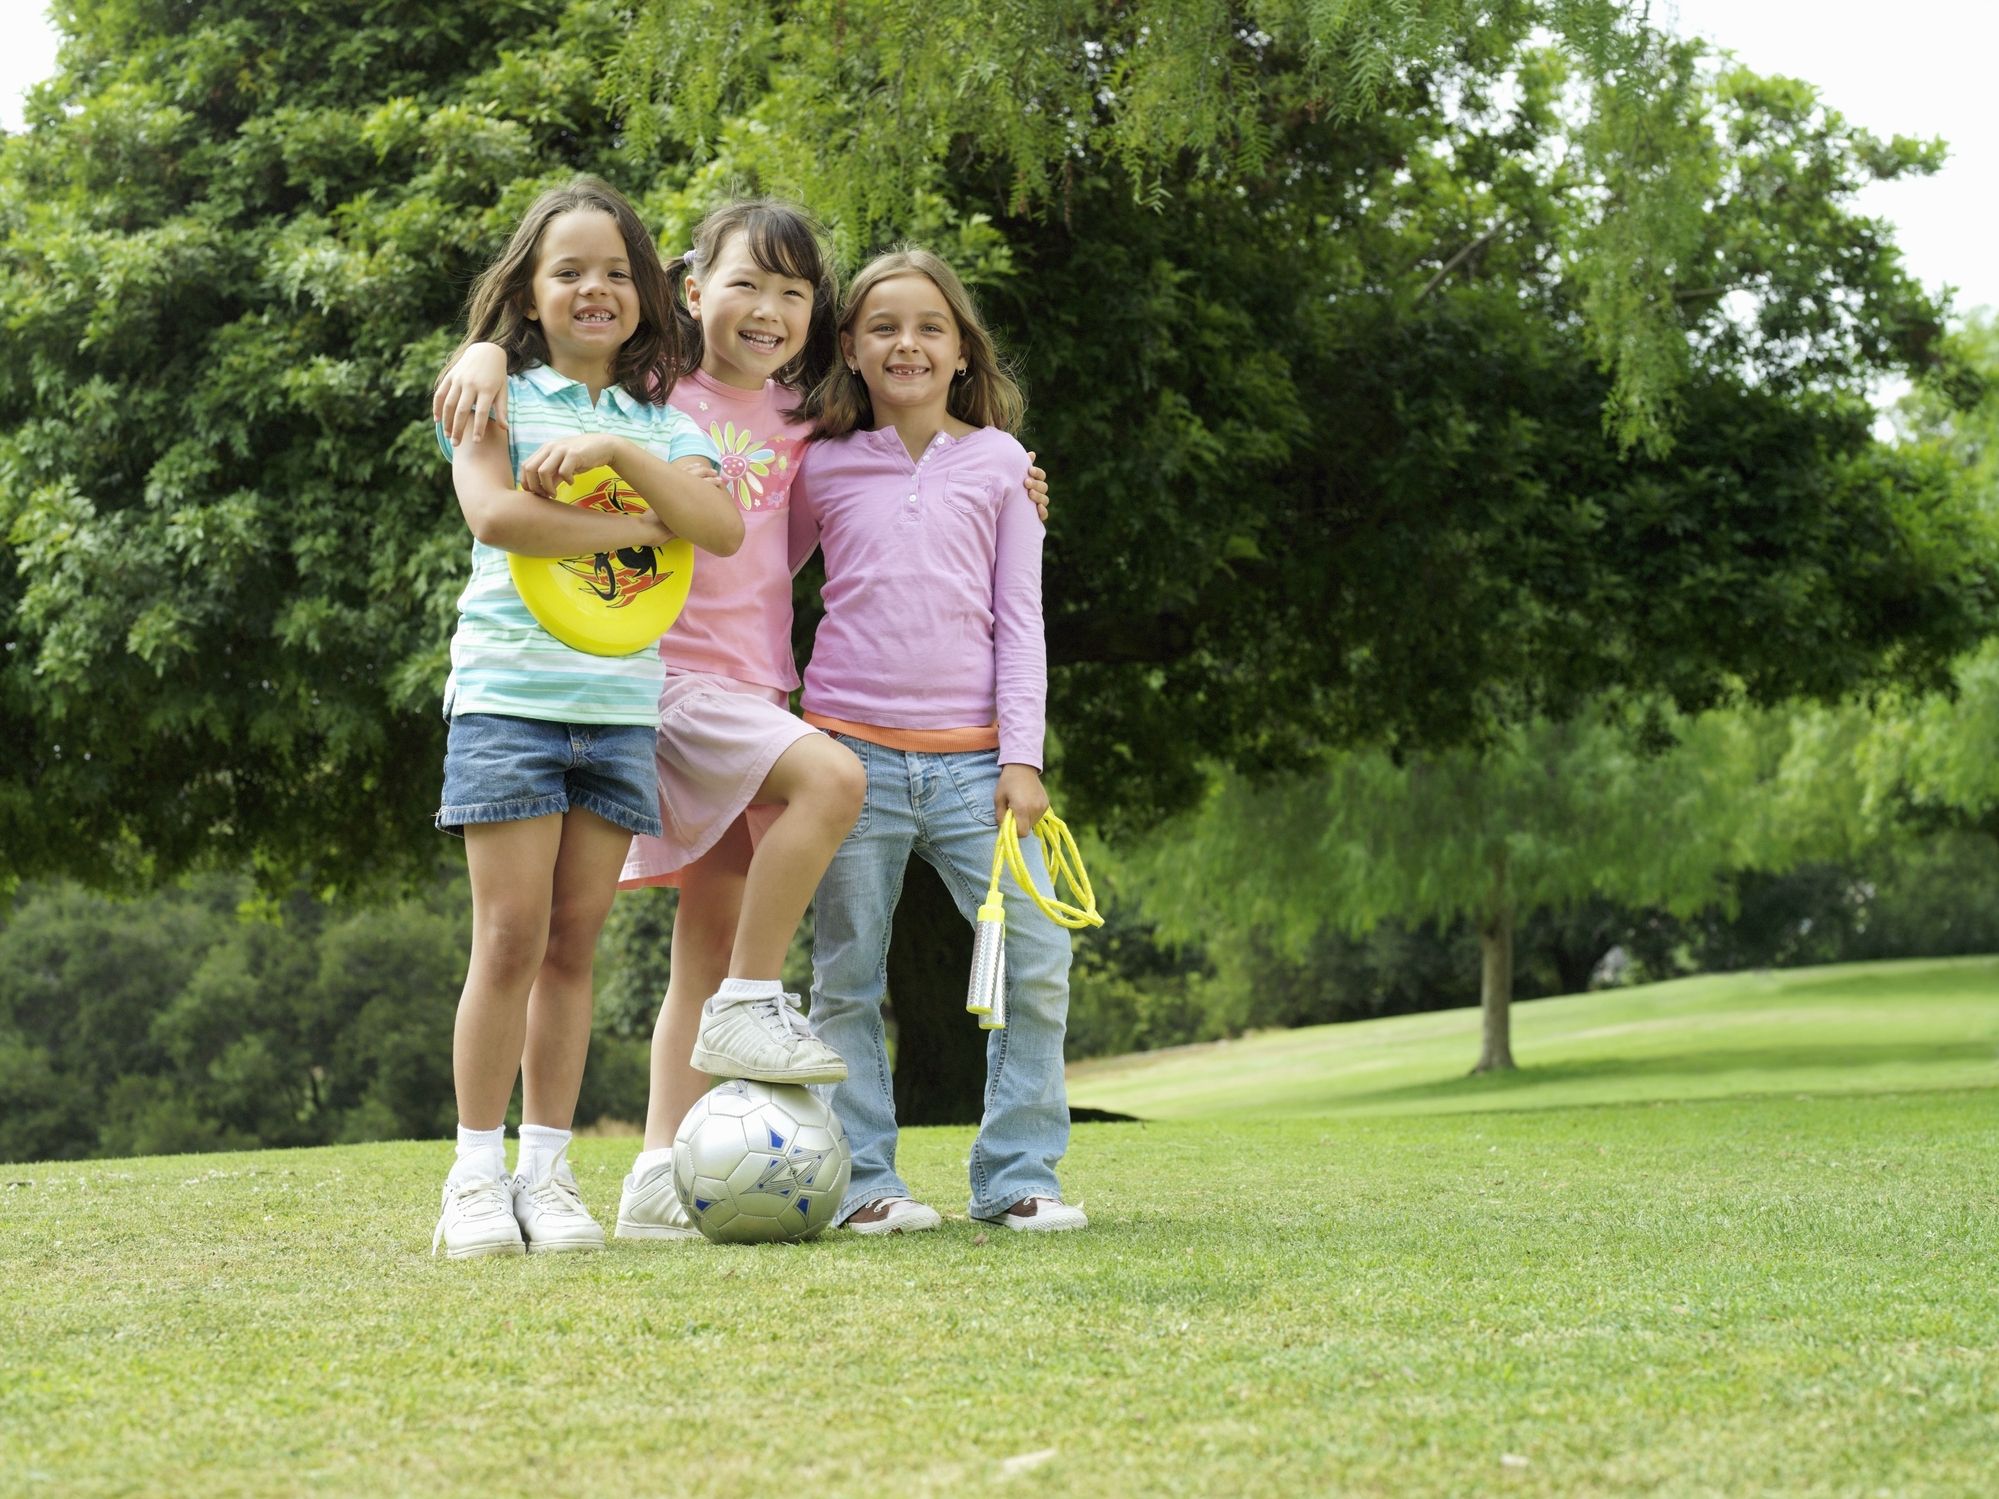 3 young girls pose with a variety of exercise and sports equipment.